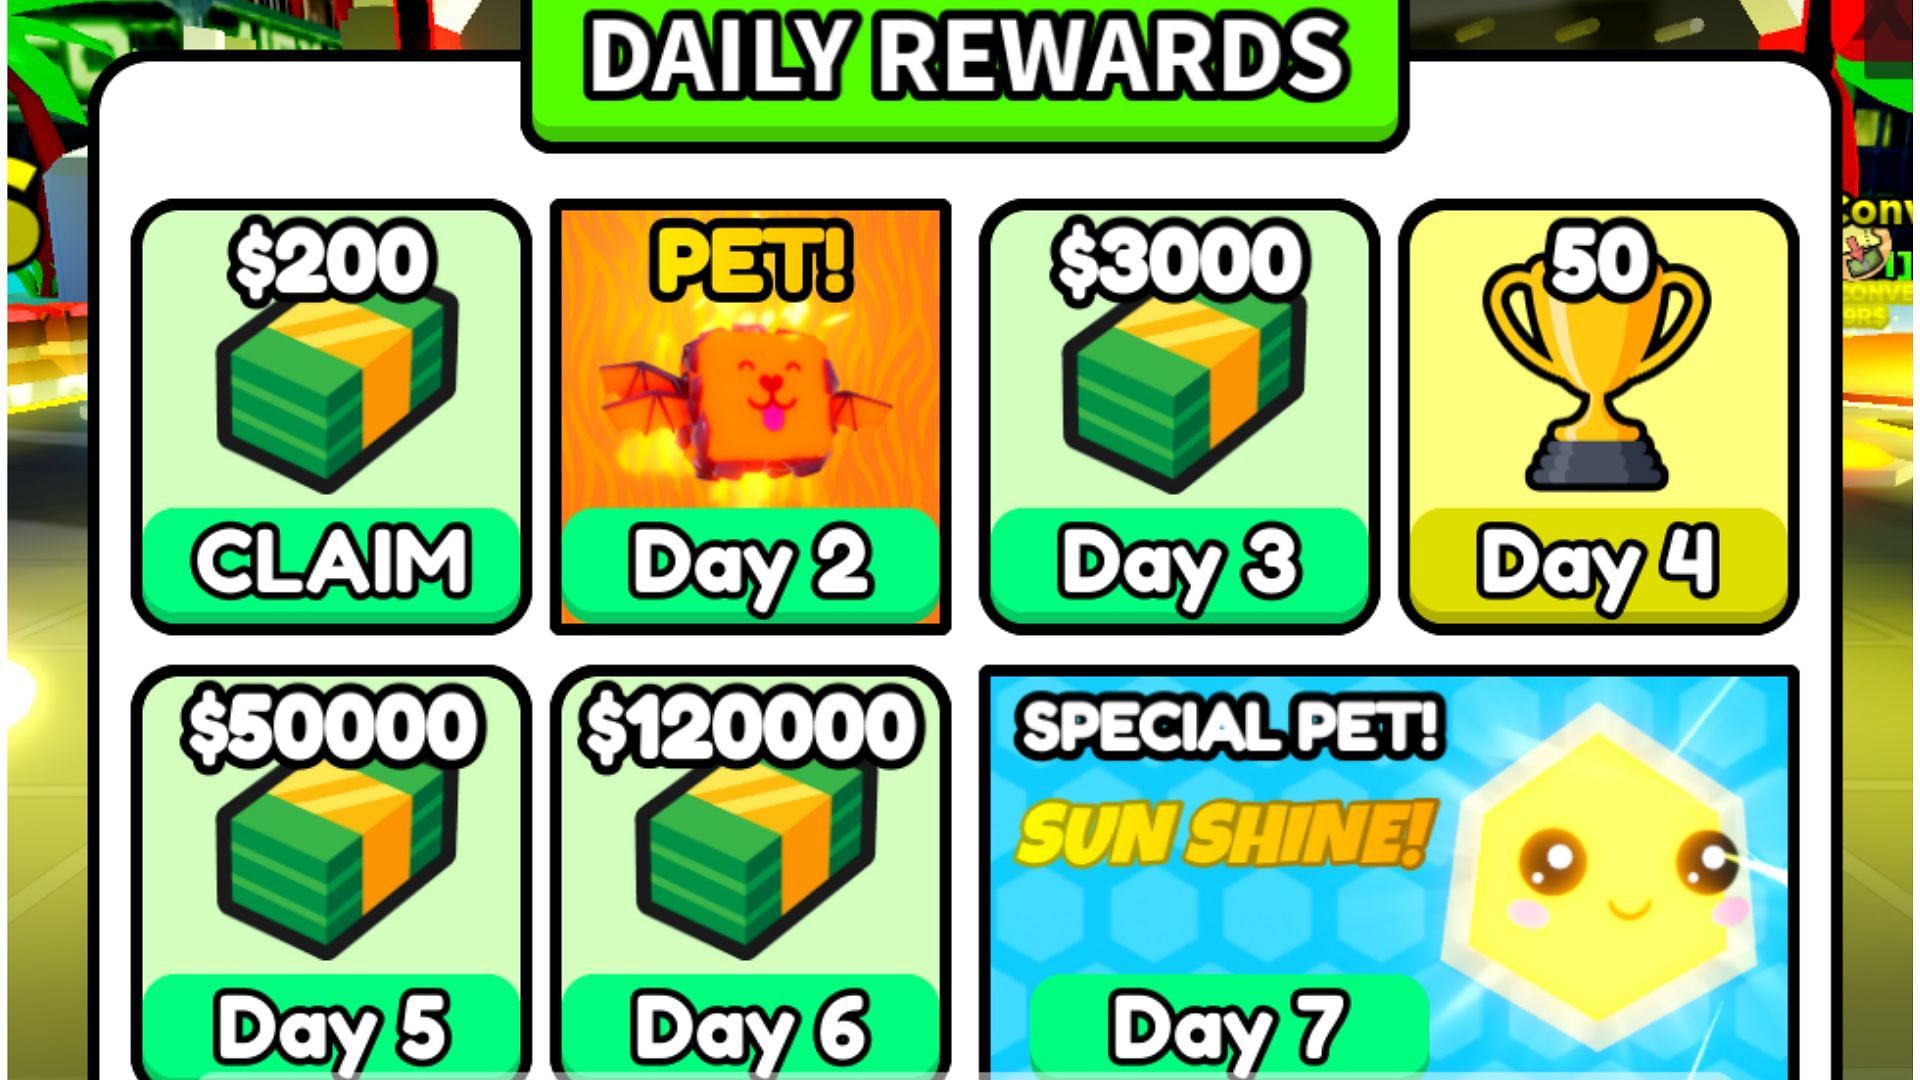 Daily rewards in Jackpot Tycoon (Image via Roblox)